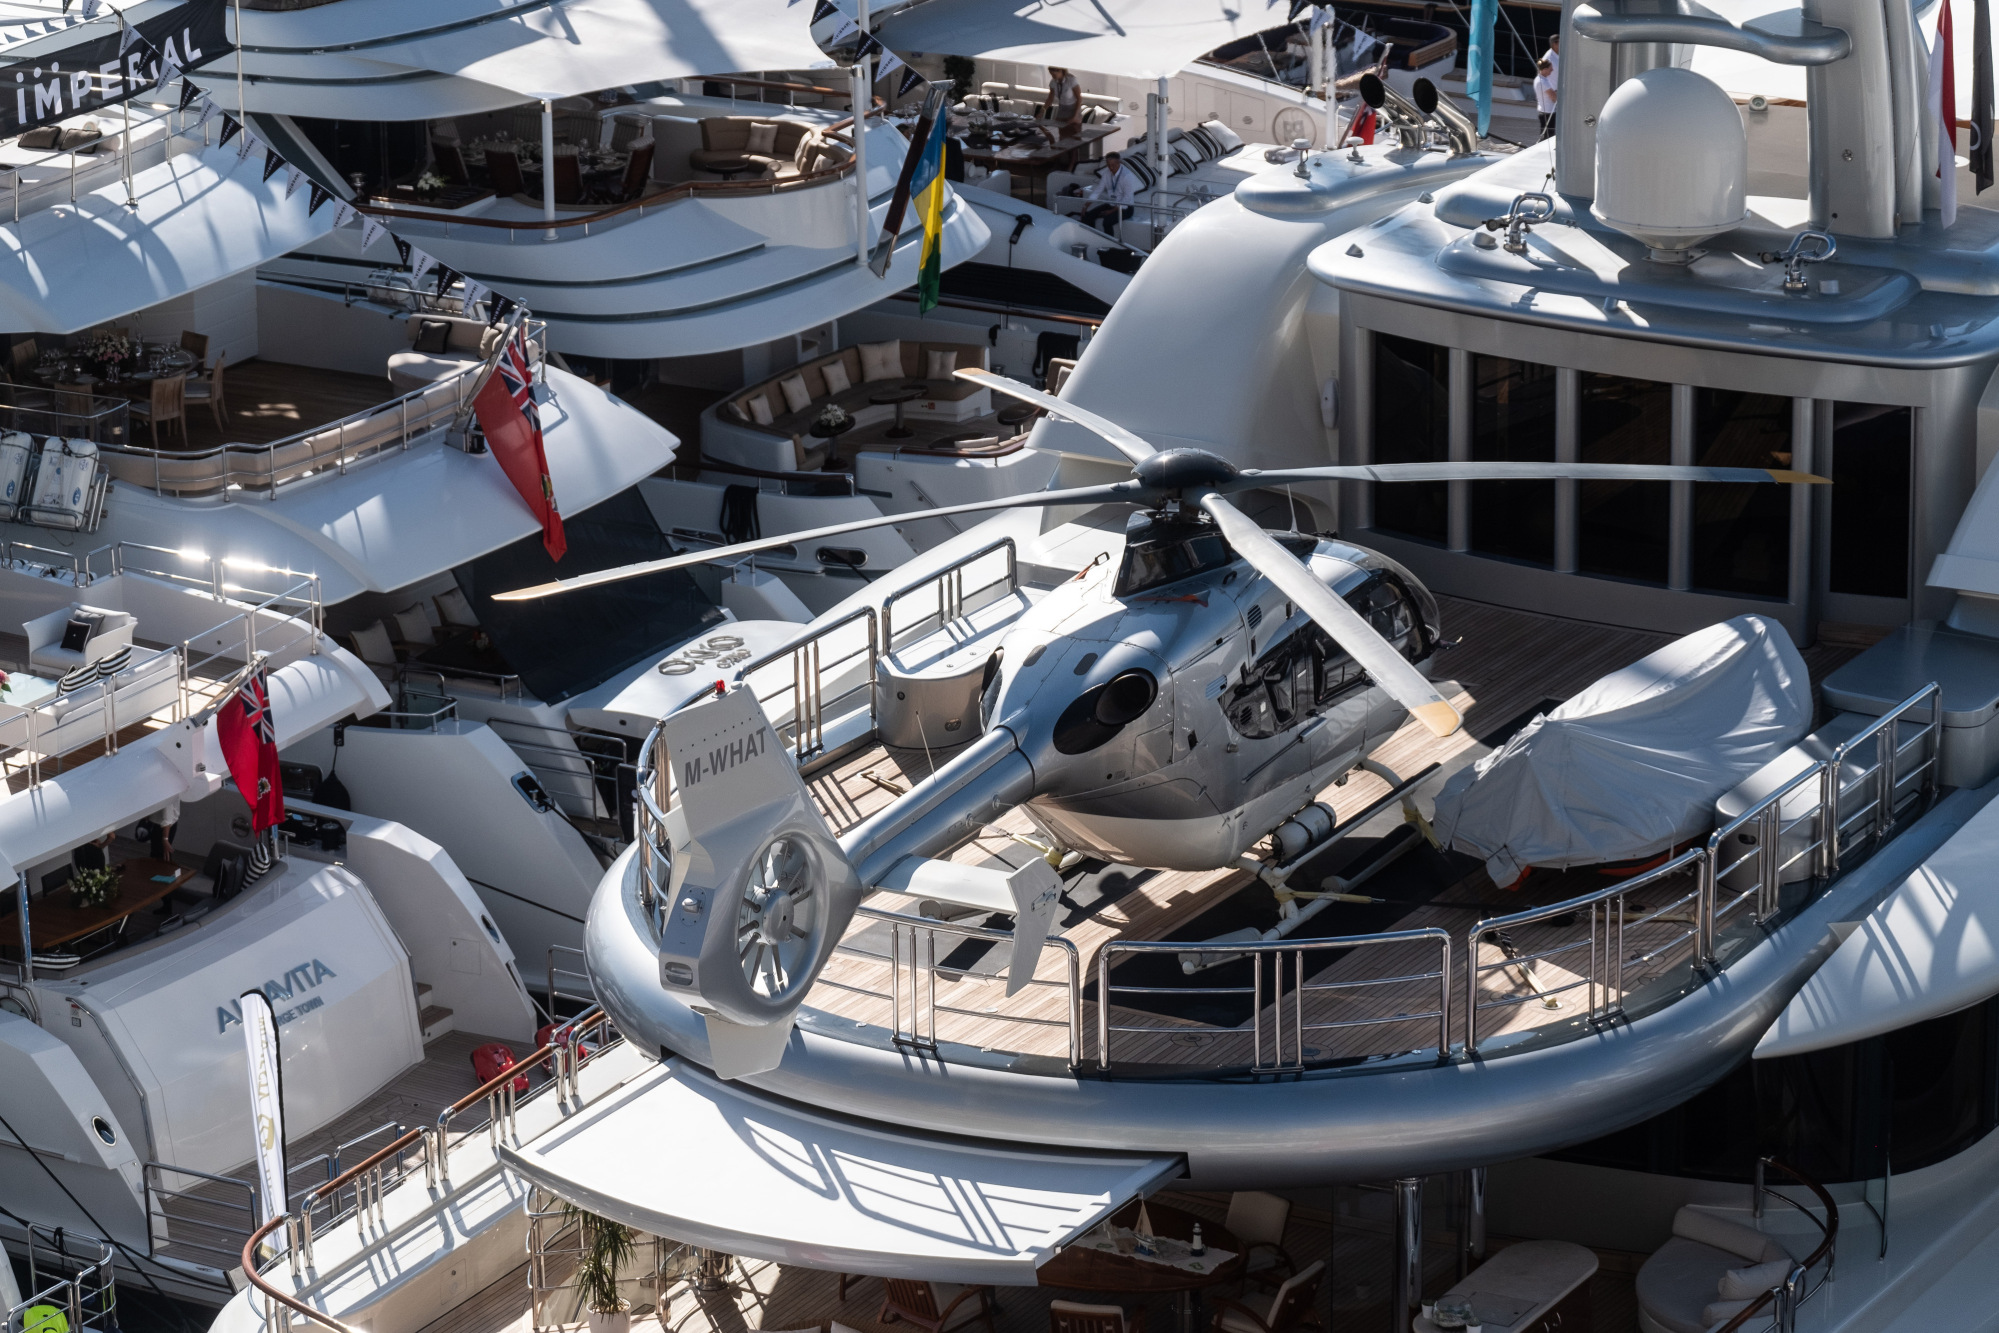 An M-What helicopter, manufactured by Airbus Helicopters SAS, sits on the helipad of luxury superyacht Anna I, manufactured by Feadship Royal Dutch Shipyards, during the Monaco Yacht Show (MYS) in Port Hercules, Monaco, on Wednesday, Sept. 26, 2018. Over 125 of the world's most luxurious yachts will be displayed during the 28th MYS, which runs Sept. 26 - 29.